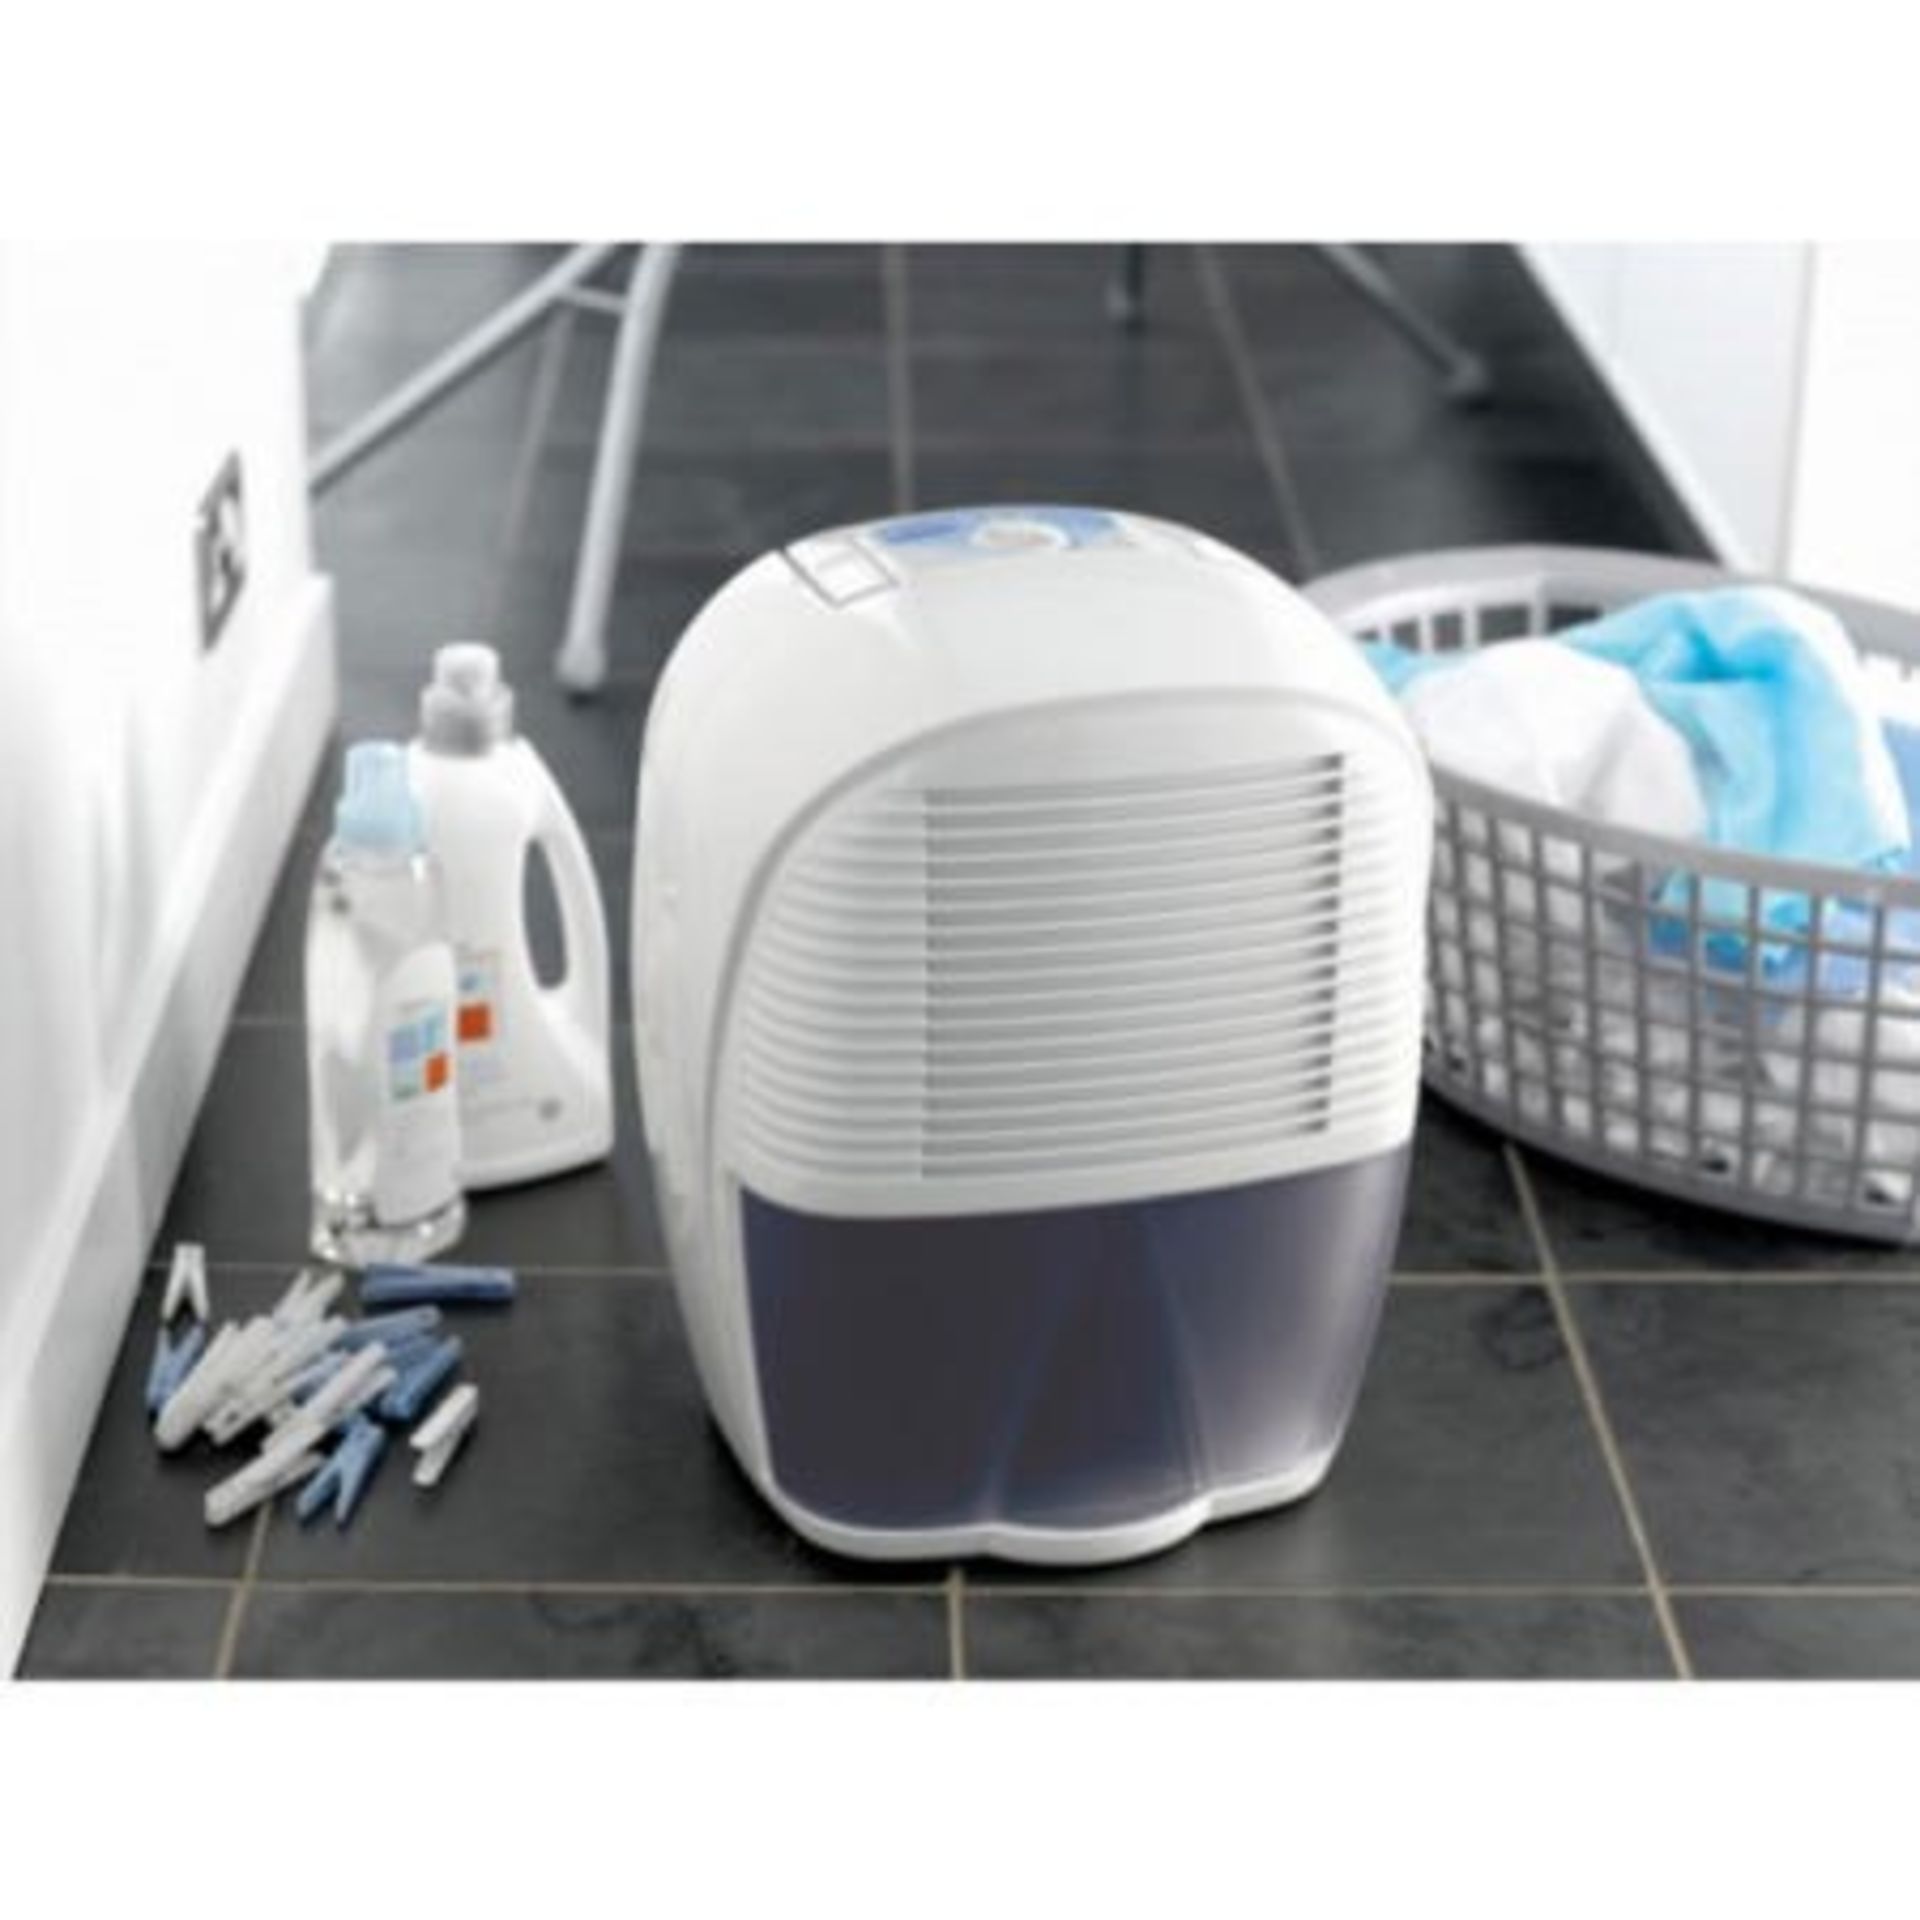 New (P153) Delonghi10L Dehumidifier Suitable For Rooms Up To 15M² 2.3 Litre Water Tank With A...